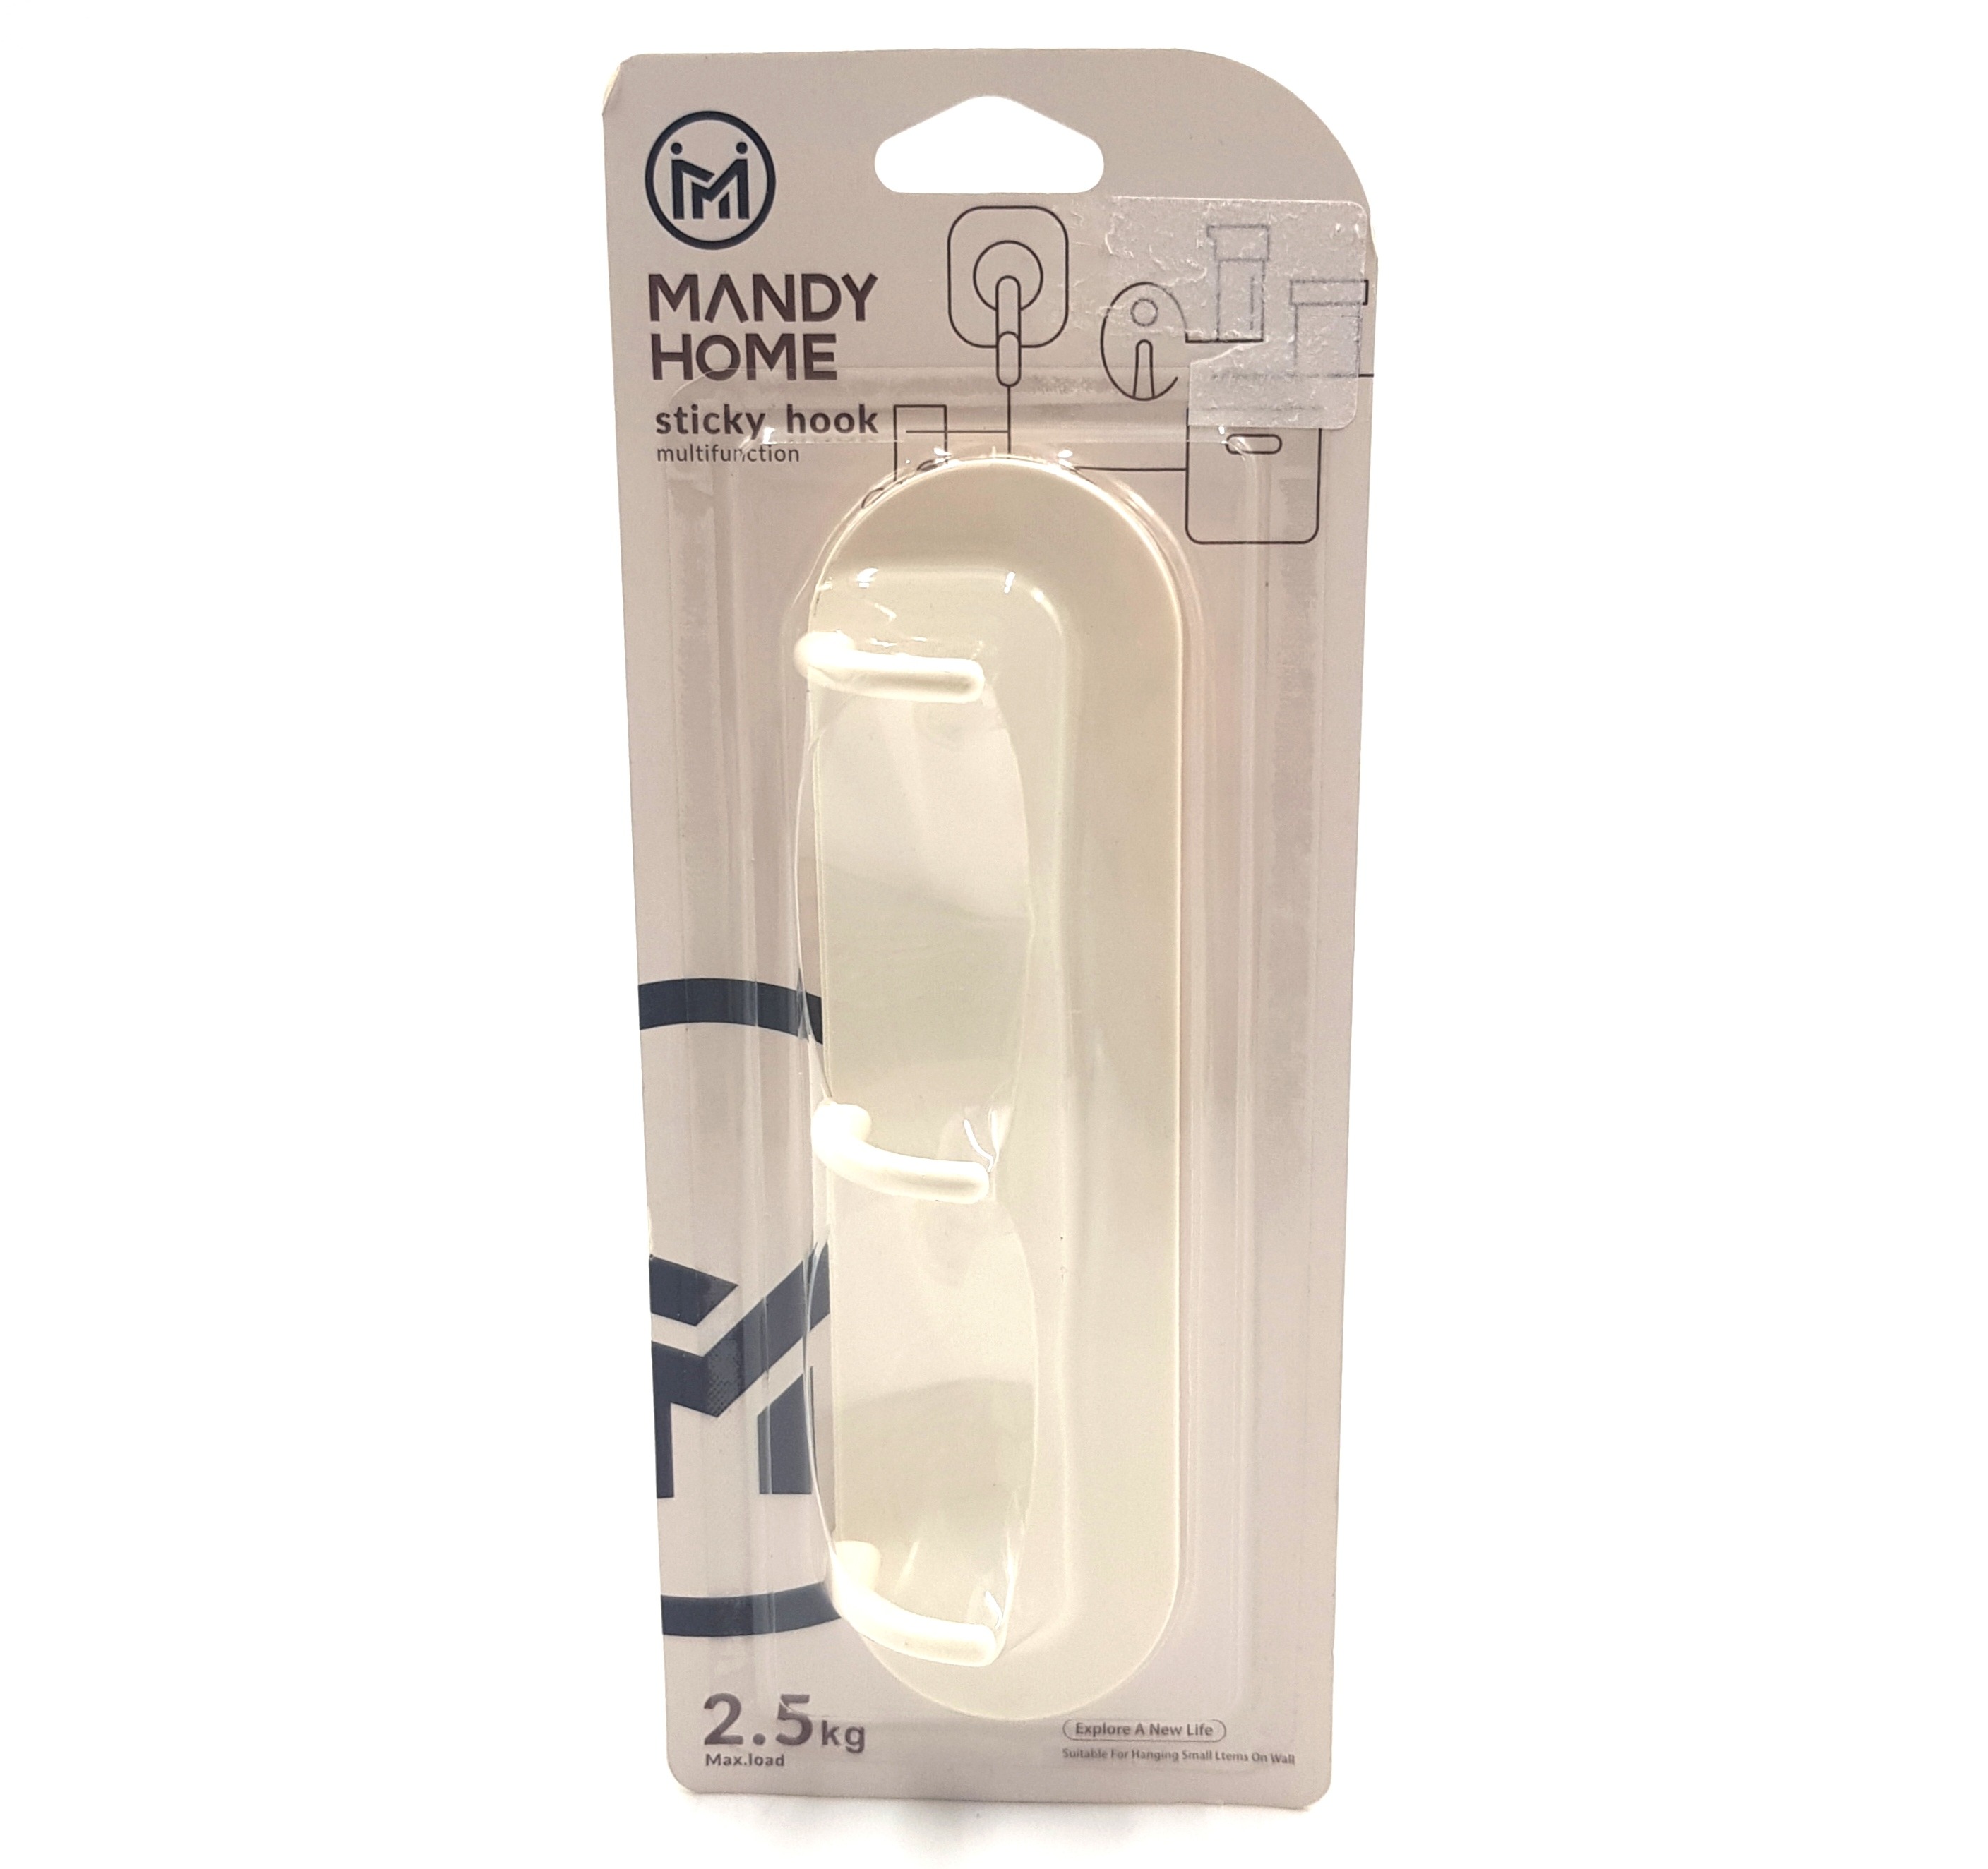 Home Plastic Hook/ Hanger Card - Self Adhesive/ Stickable 1 pc